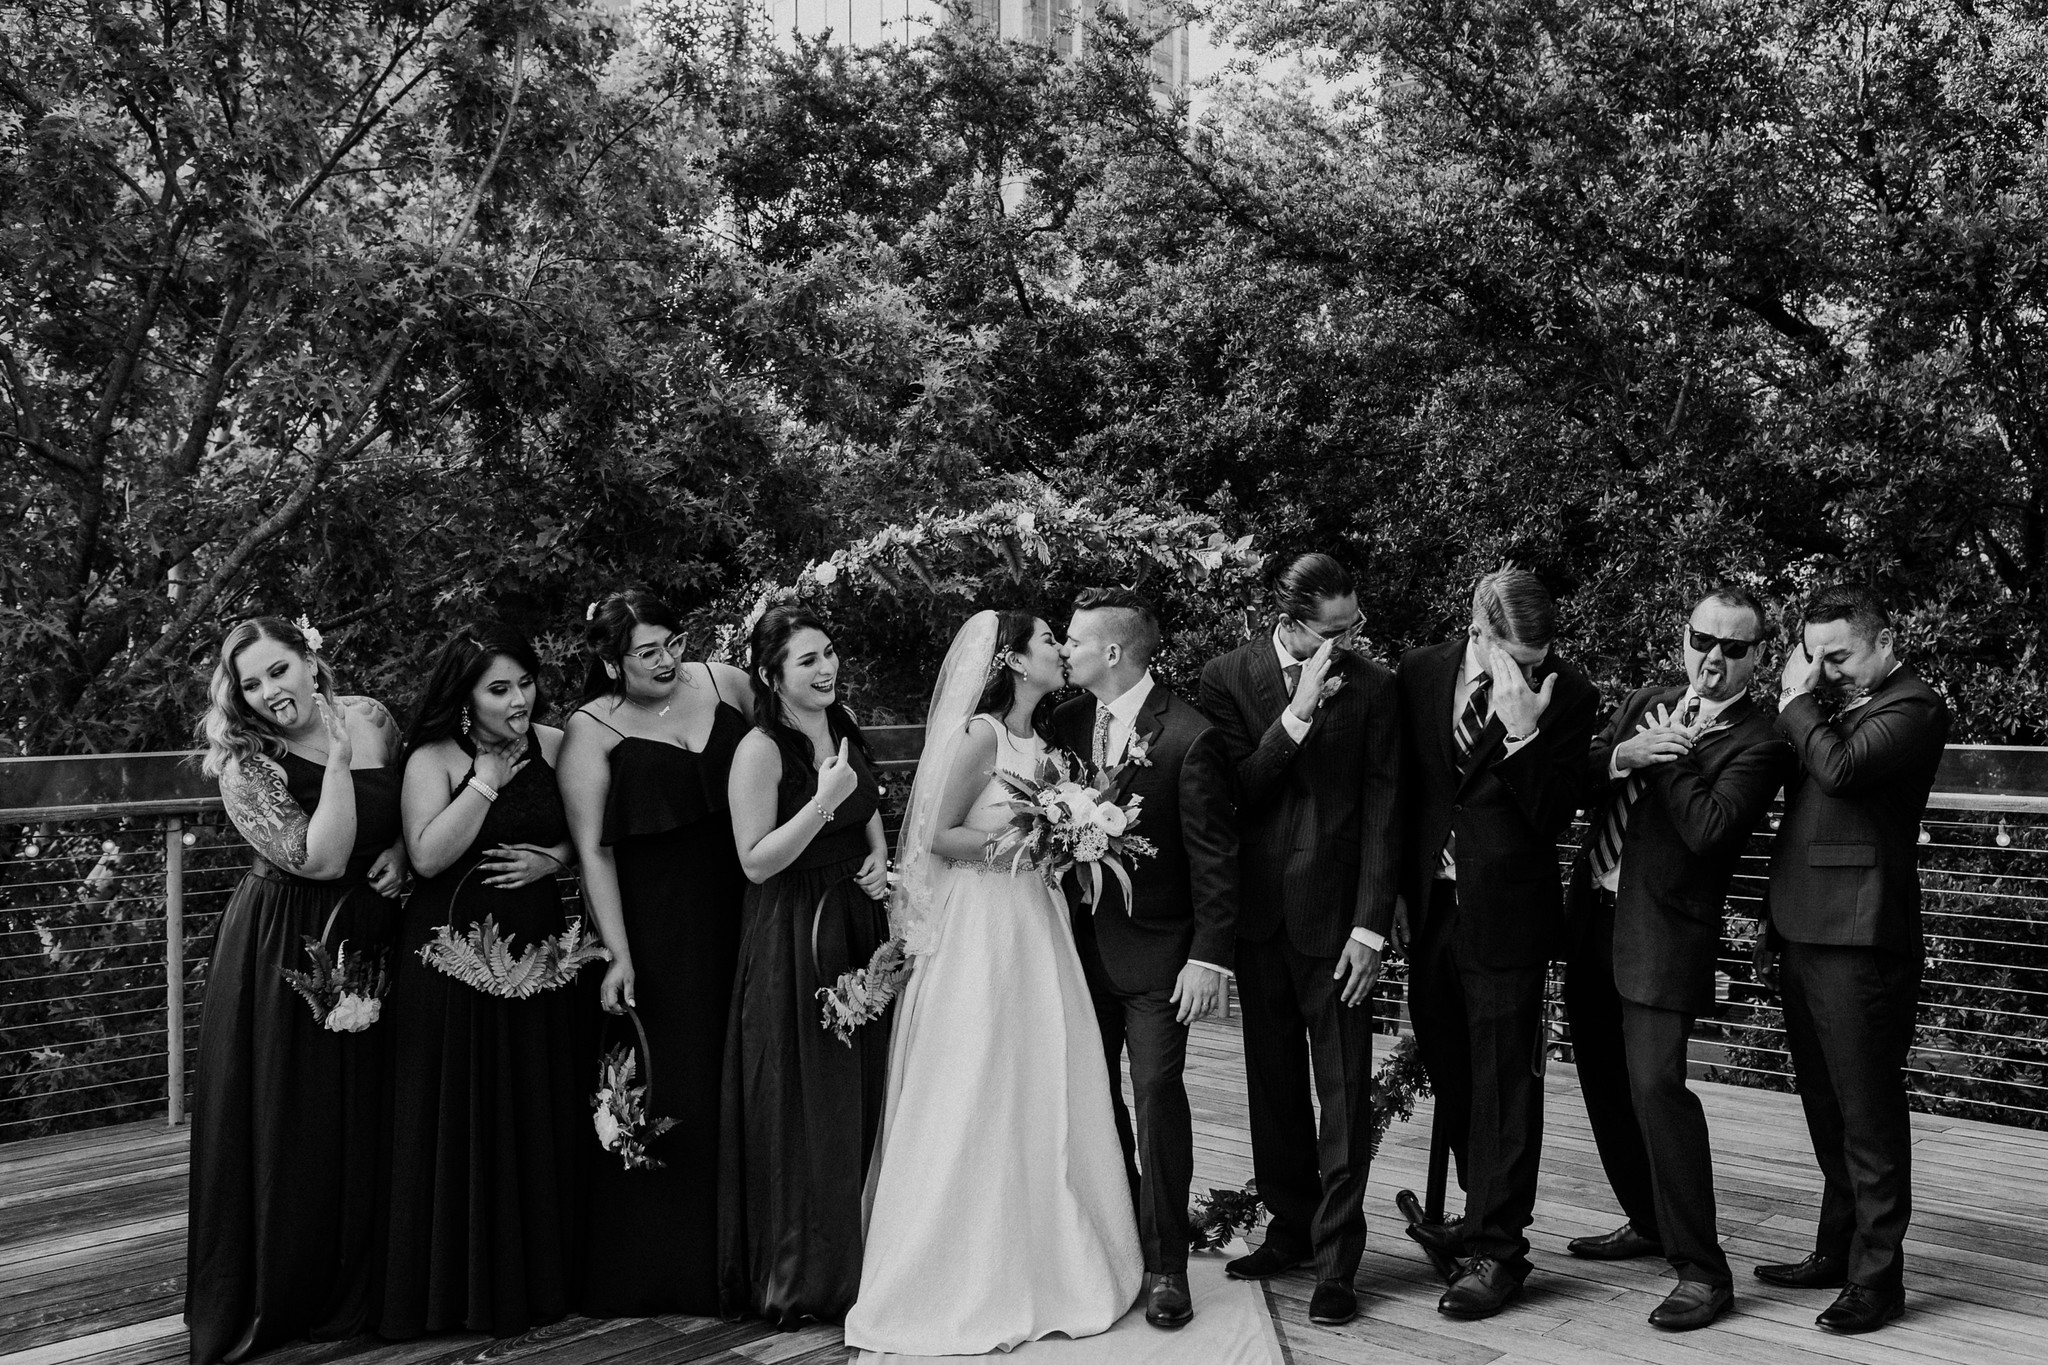 Wedding party bridal party group portraits. Wedding at The Grove at Discovery Green Park (Houston, TX)